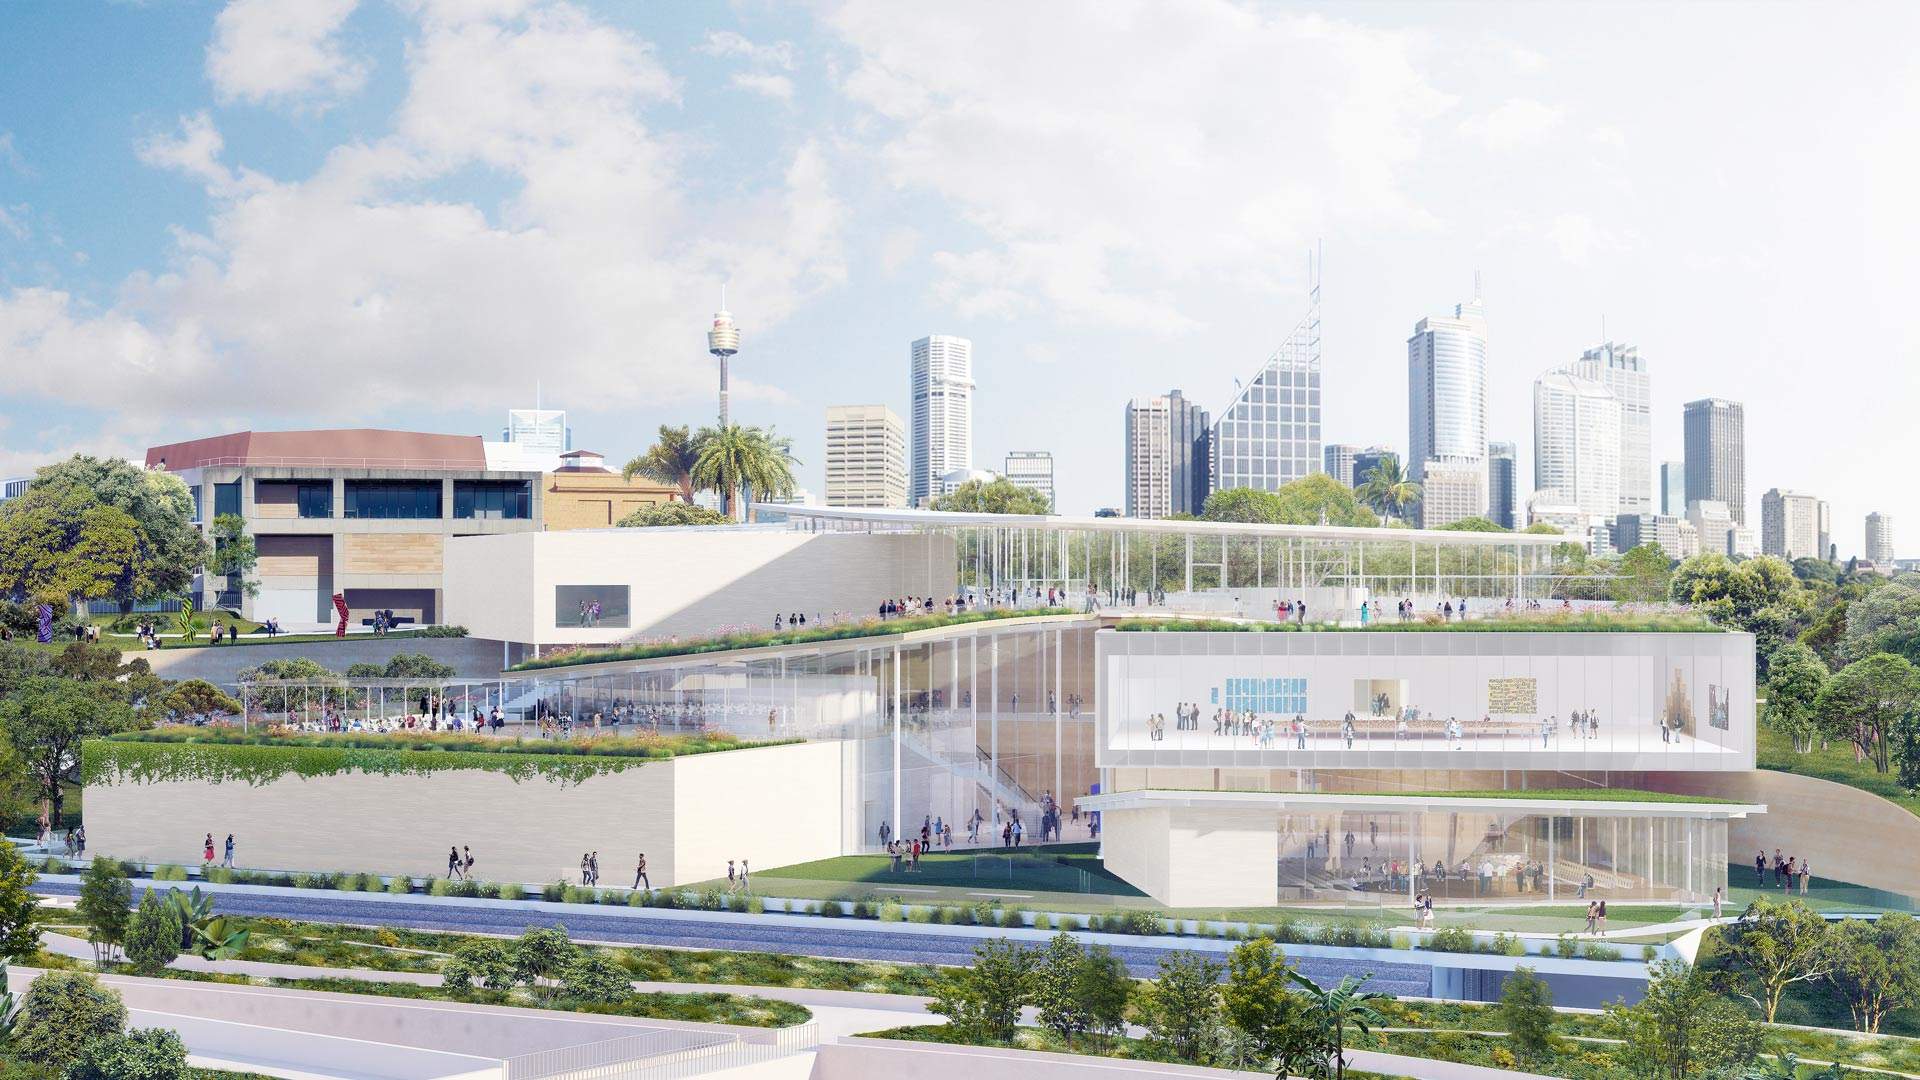 The Art Gallery of NSW's Massive $344 Million Expansion Has Been Given the Green Light